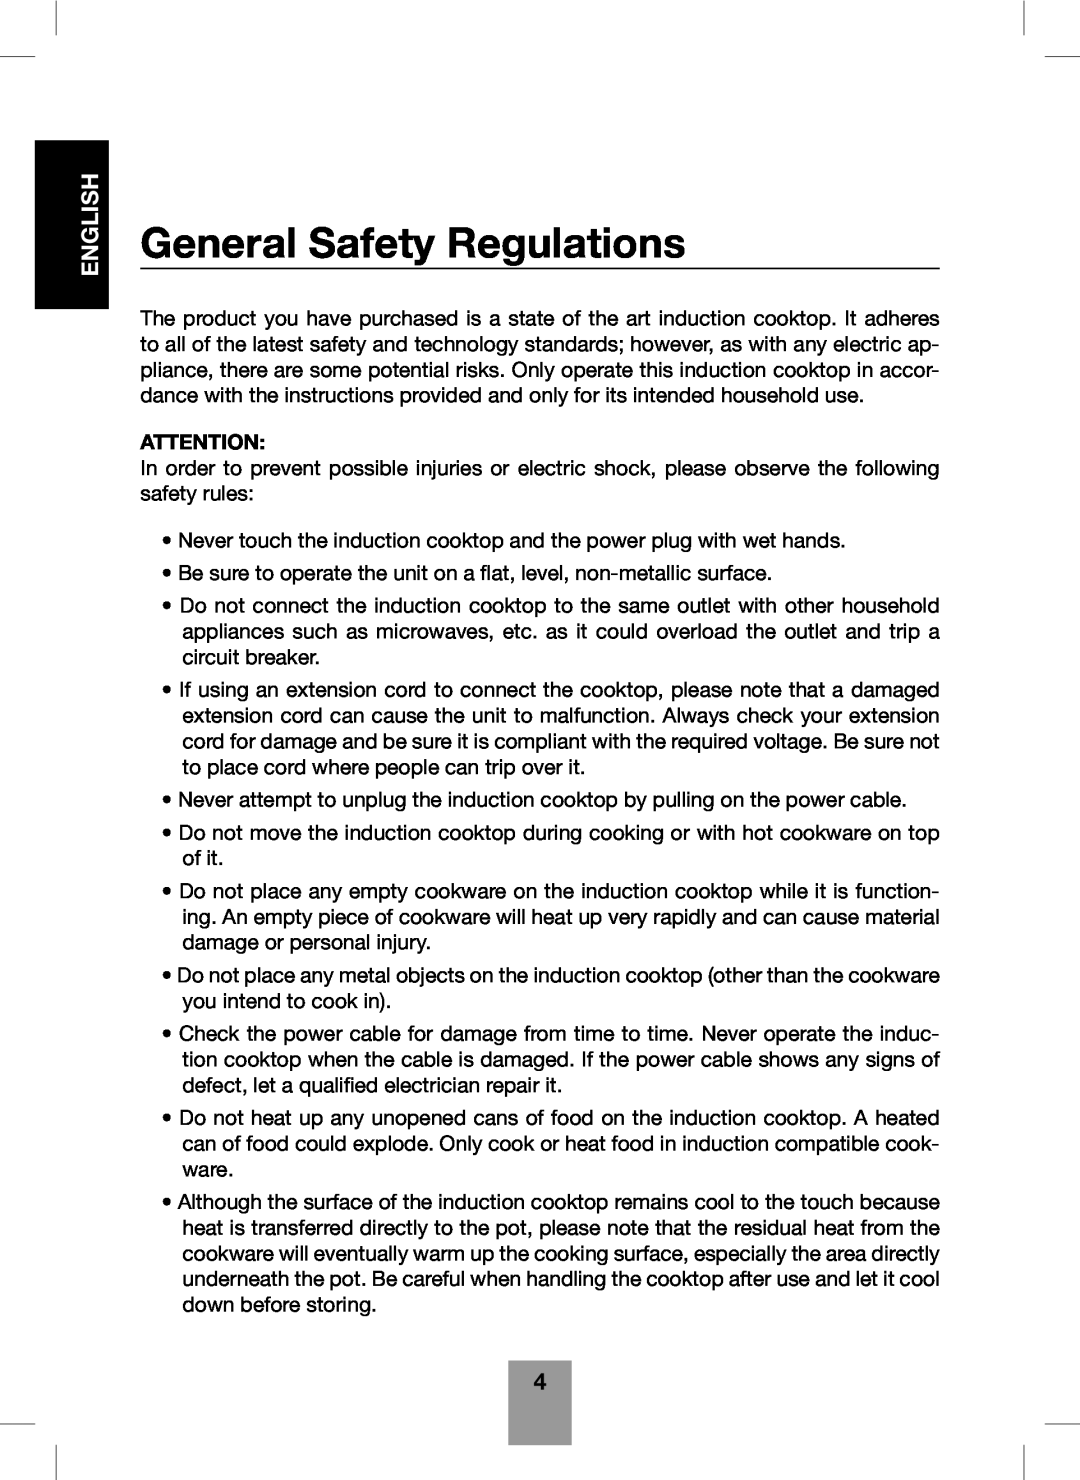 Fagor America Portable Induction Cooktop user manual General Safety Regulations, English 